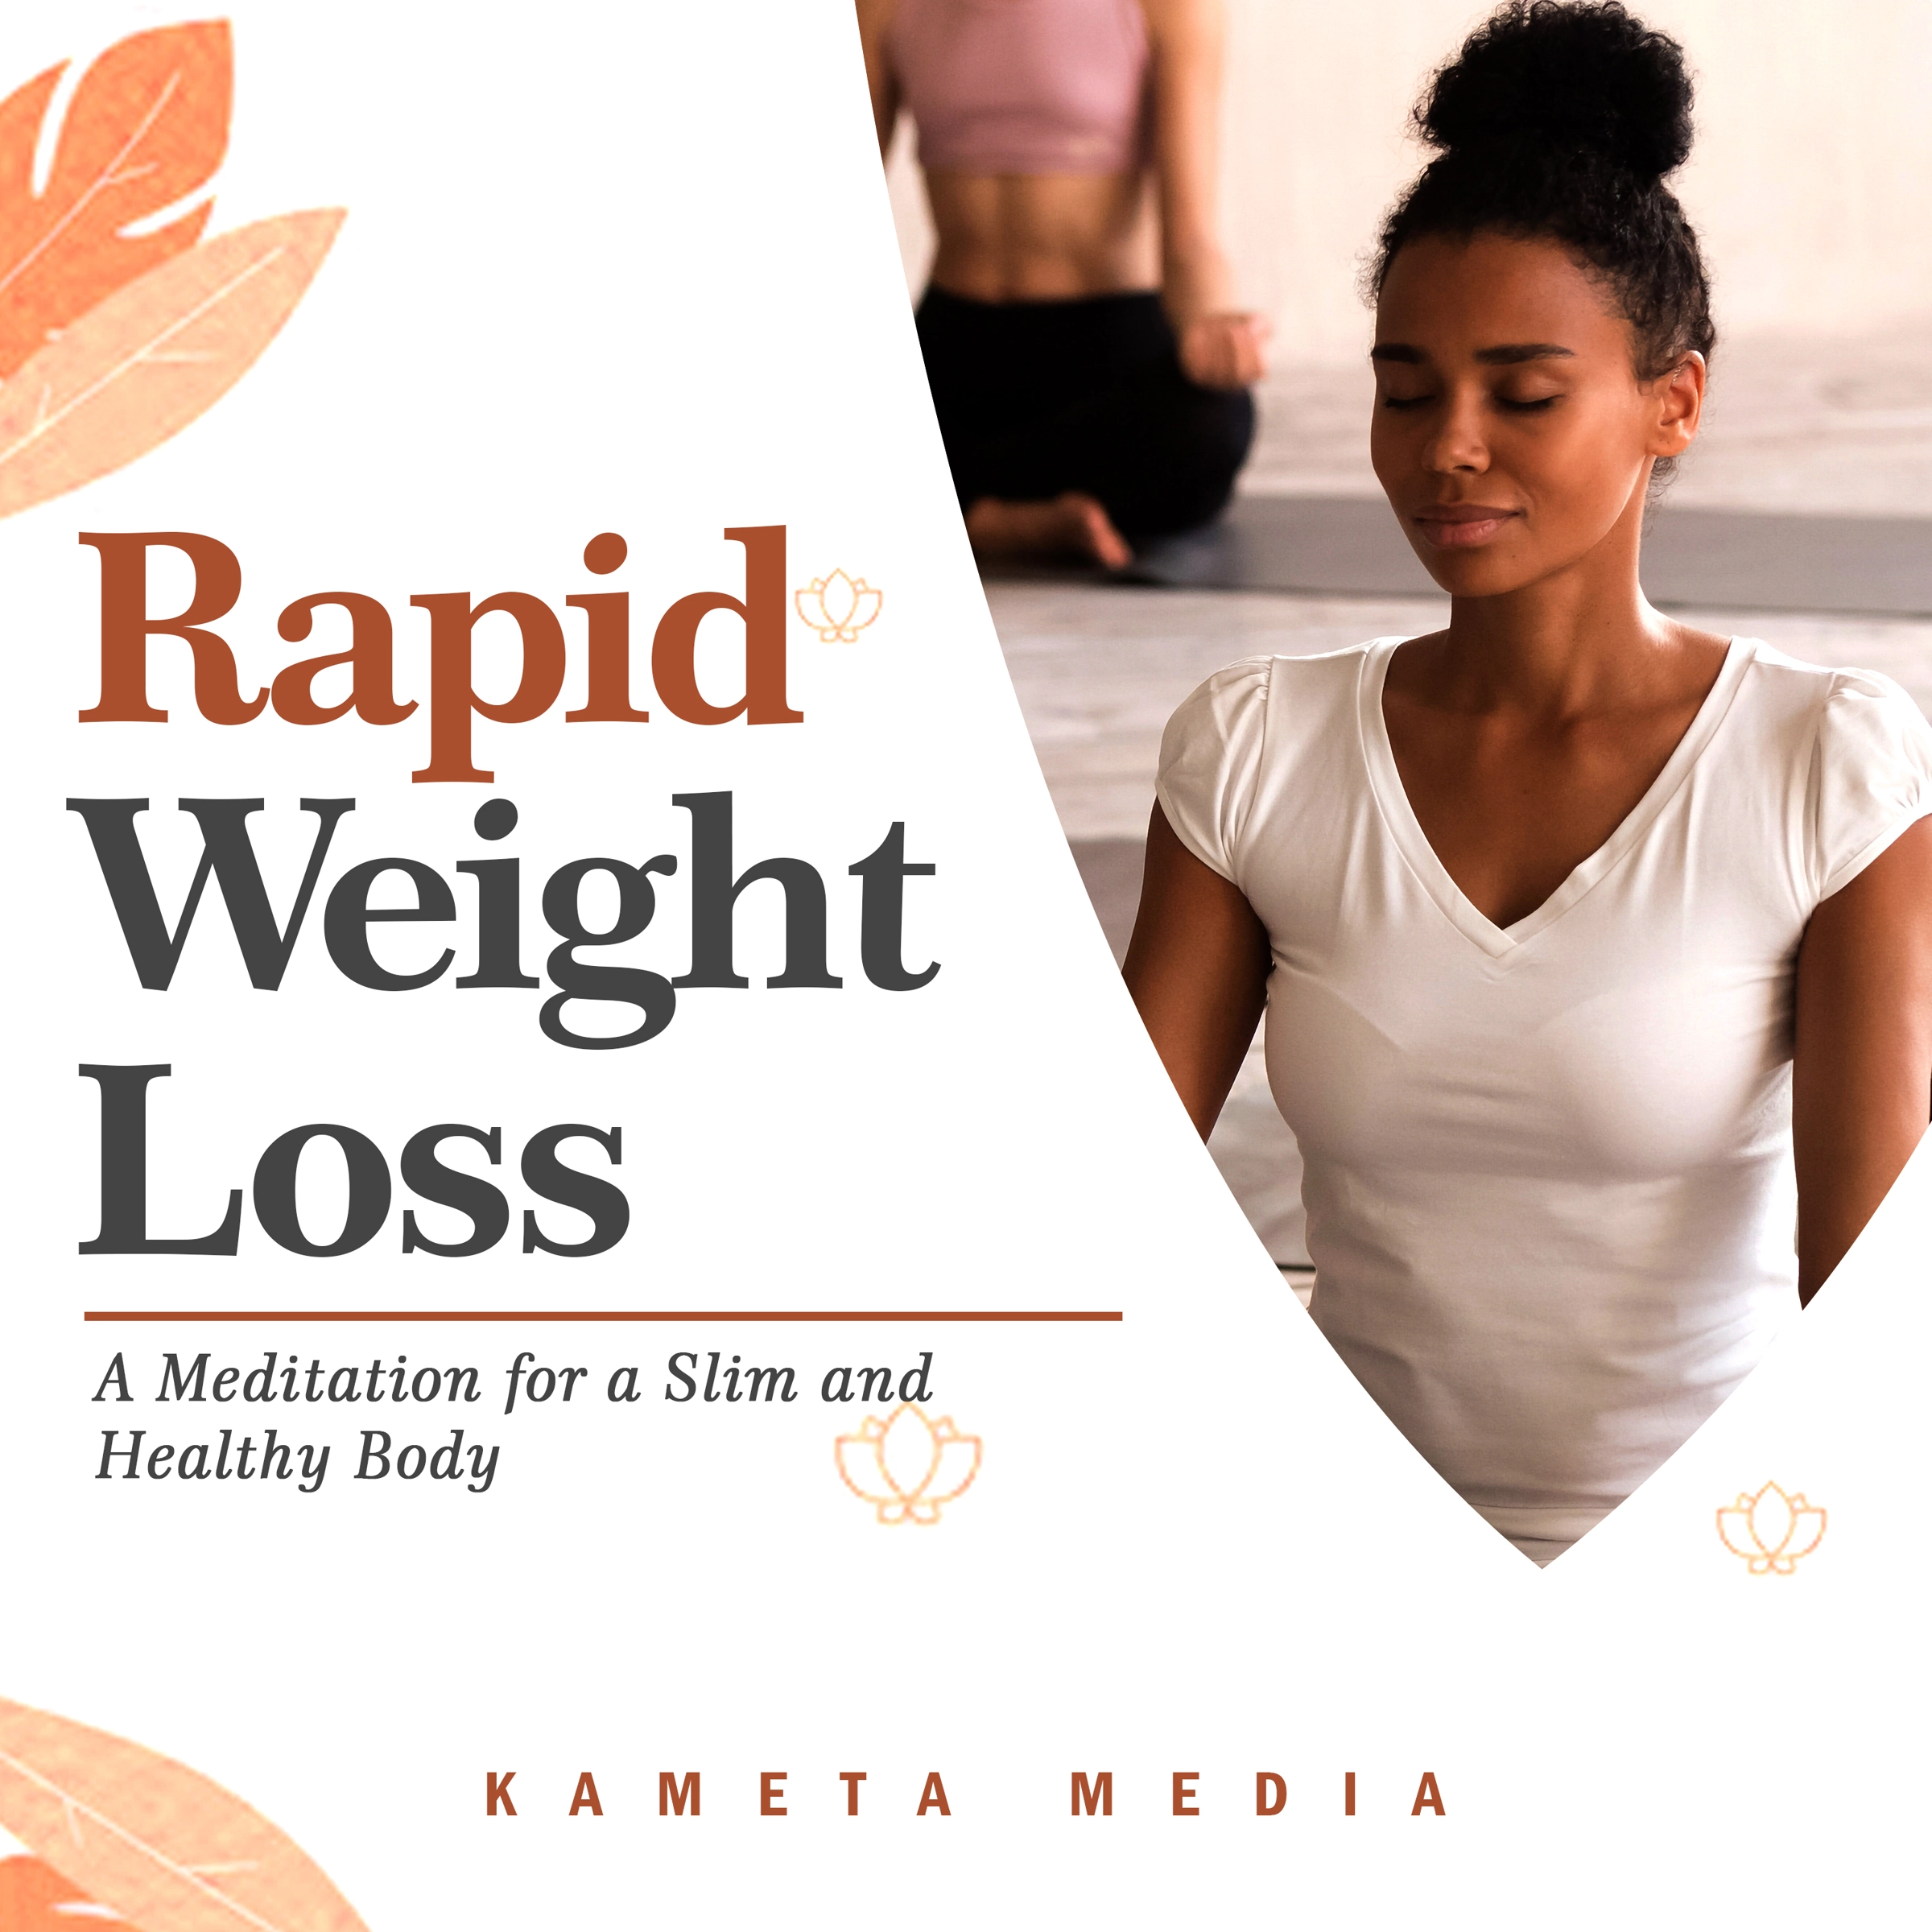 Rapid Weight Loss: A Meditation for a Slim and Healthy Body Audiobook by Kameta Media